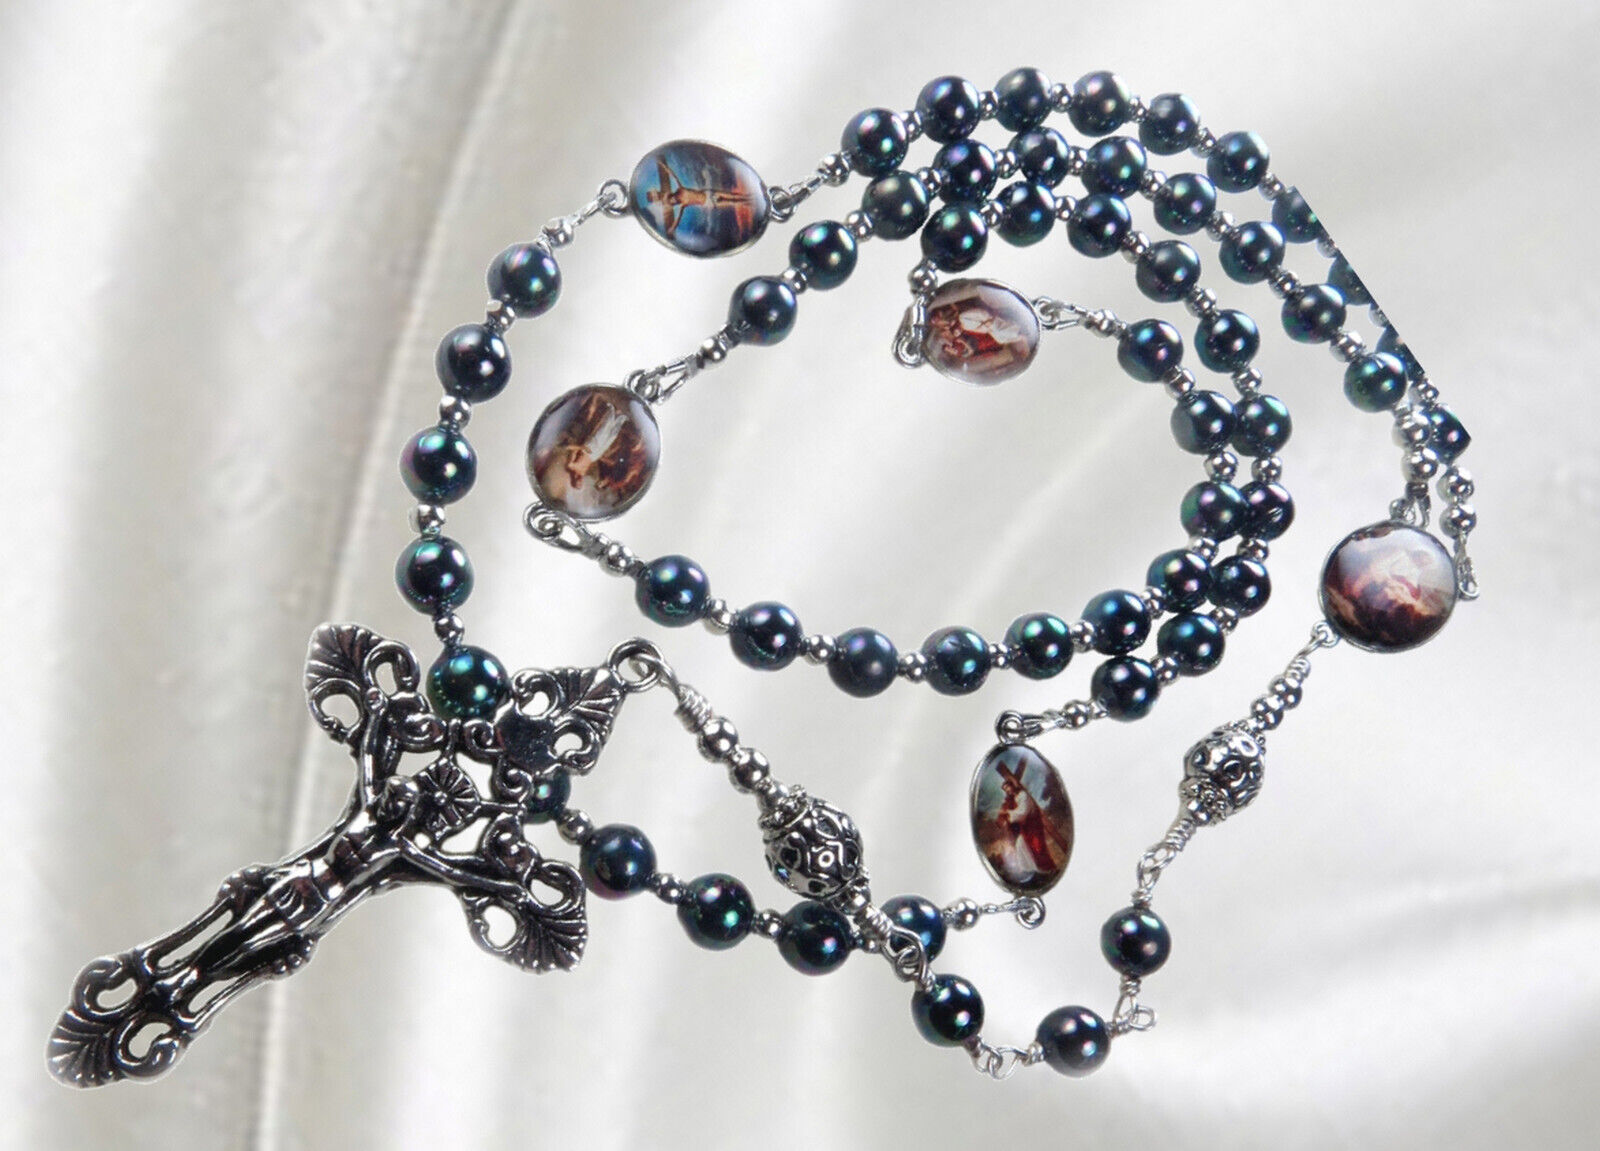 Handmade Catholic Servite Rosary, Chaplet of the Five Sorrowful Mysteries